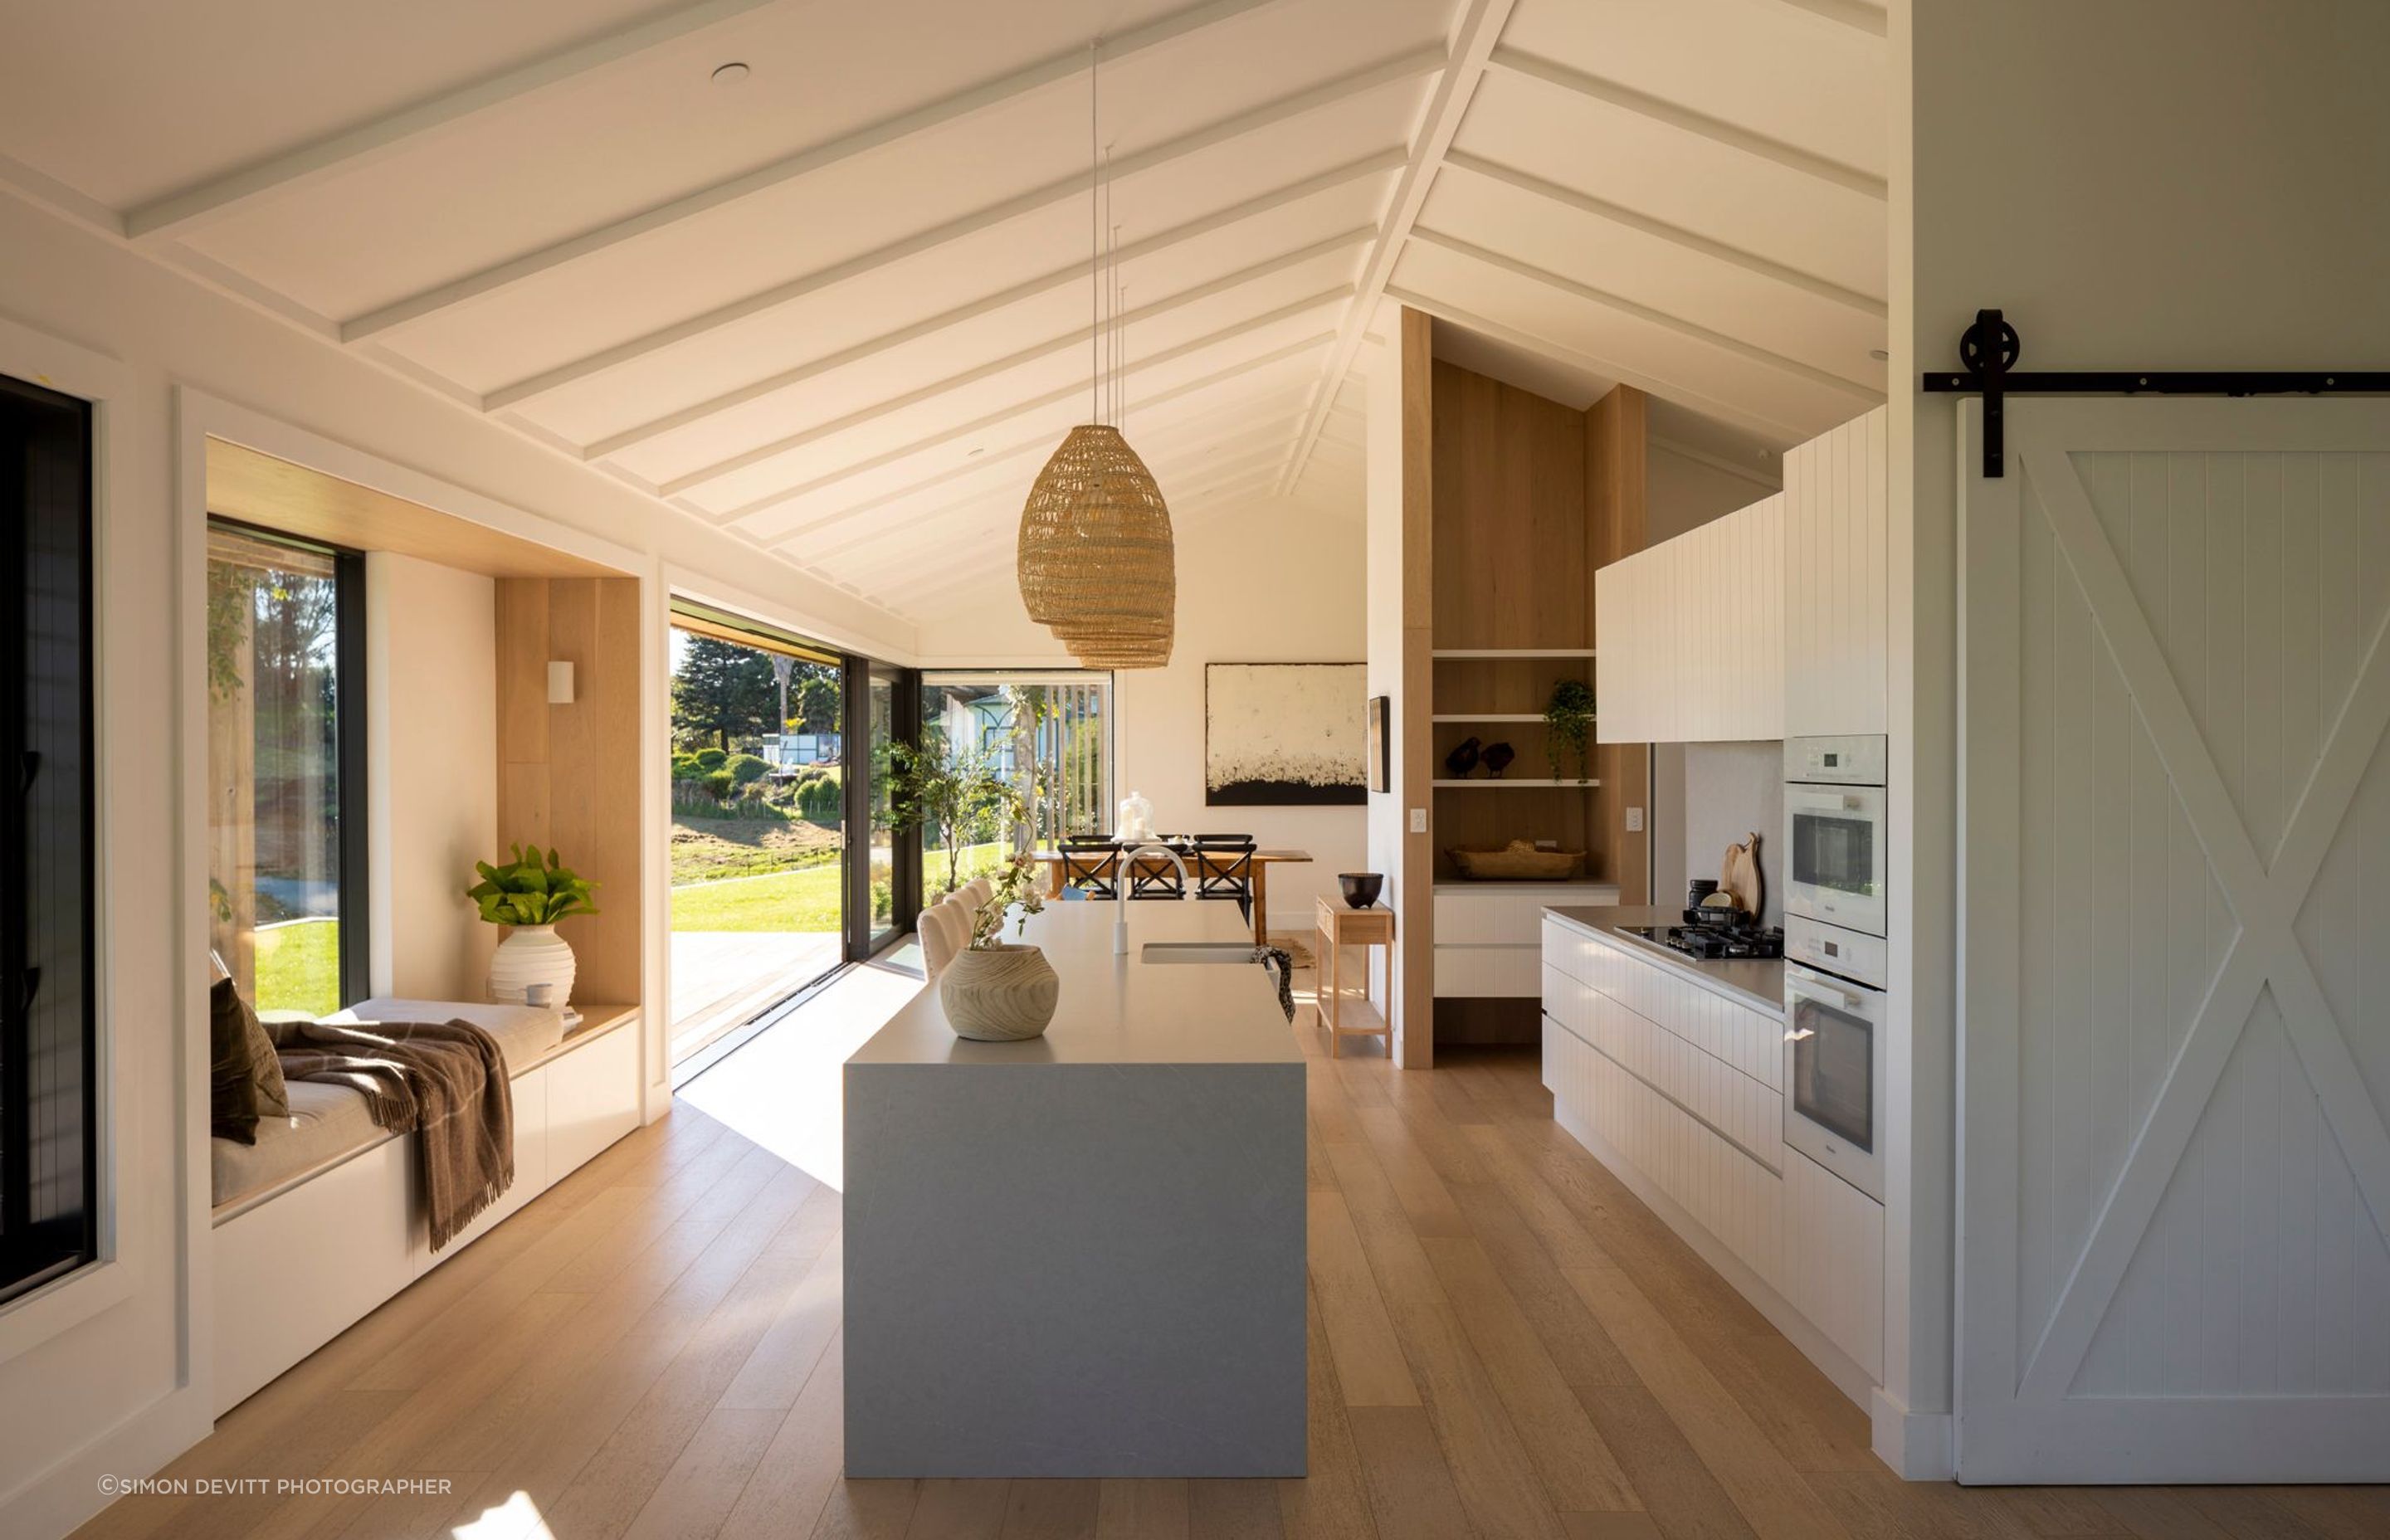 The kitchen/dining space is light and bright, with pale oak floorboards and a kitchen featuring V-groove panelling.